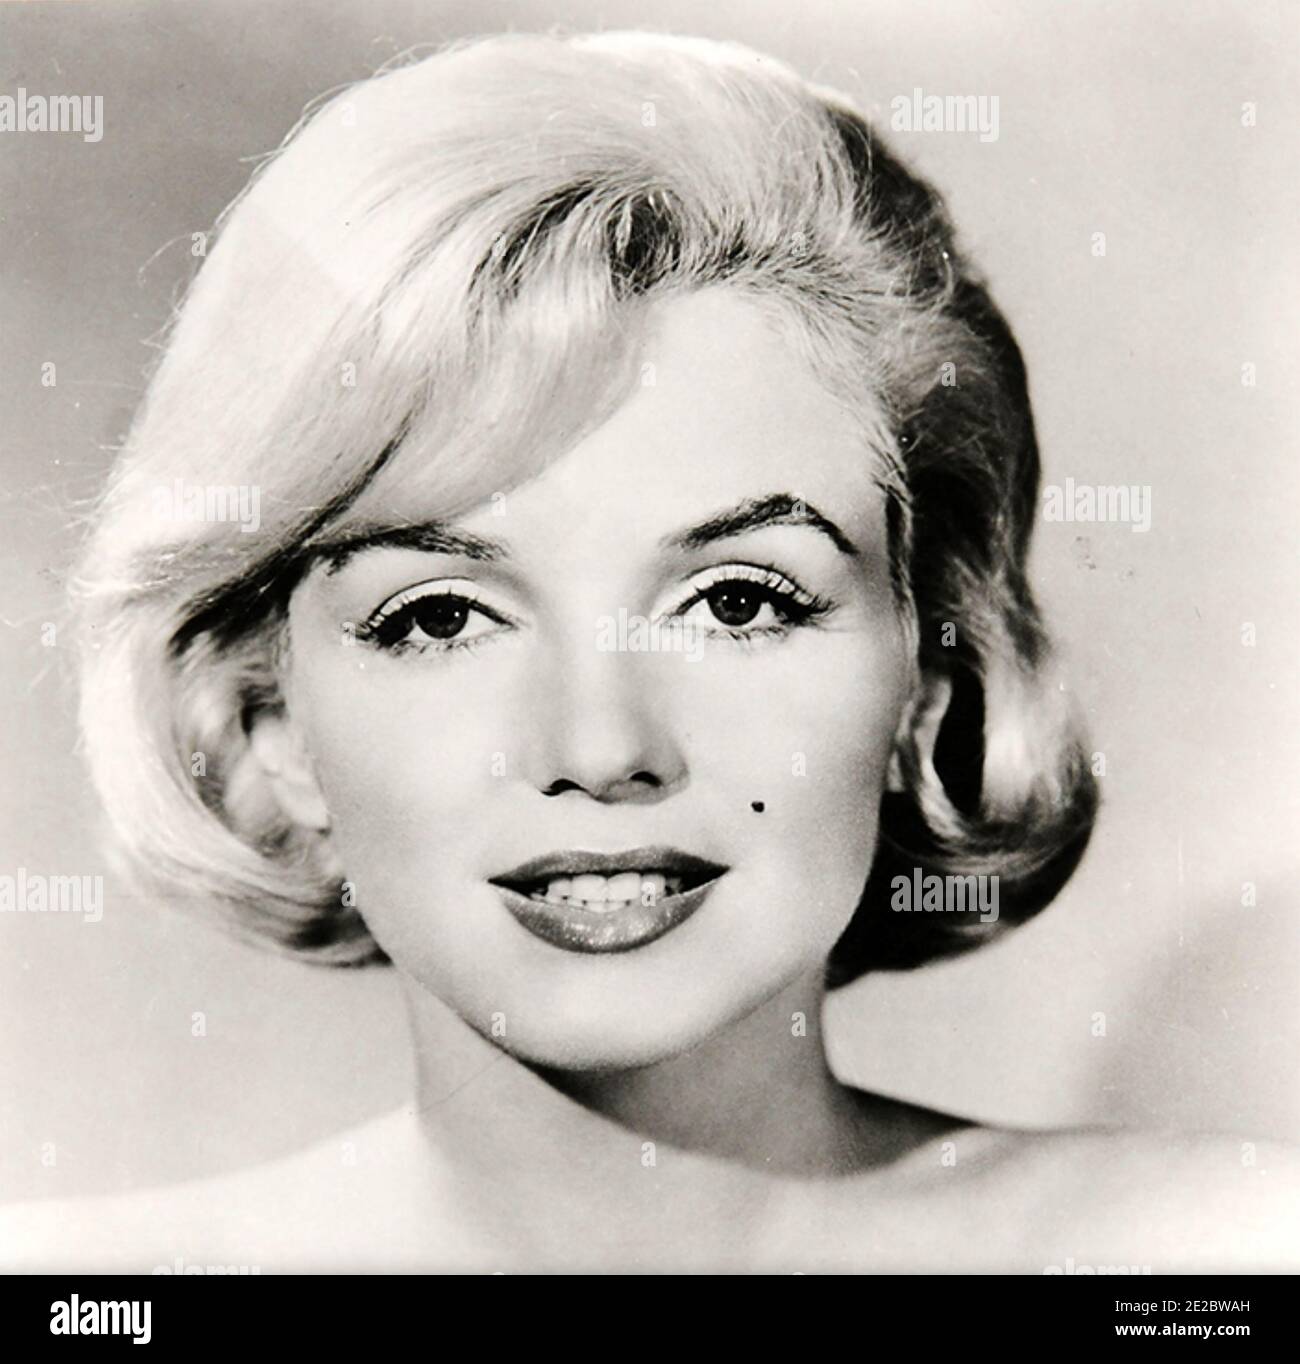 MARILYN MONROE (1926-1962) actrice américaine vers 1960. Banque D'Images